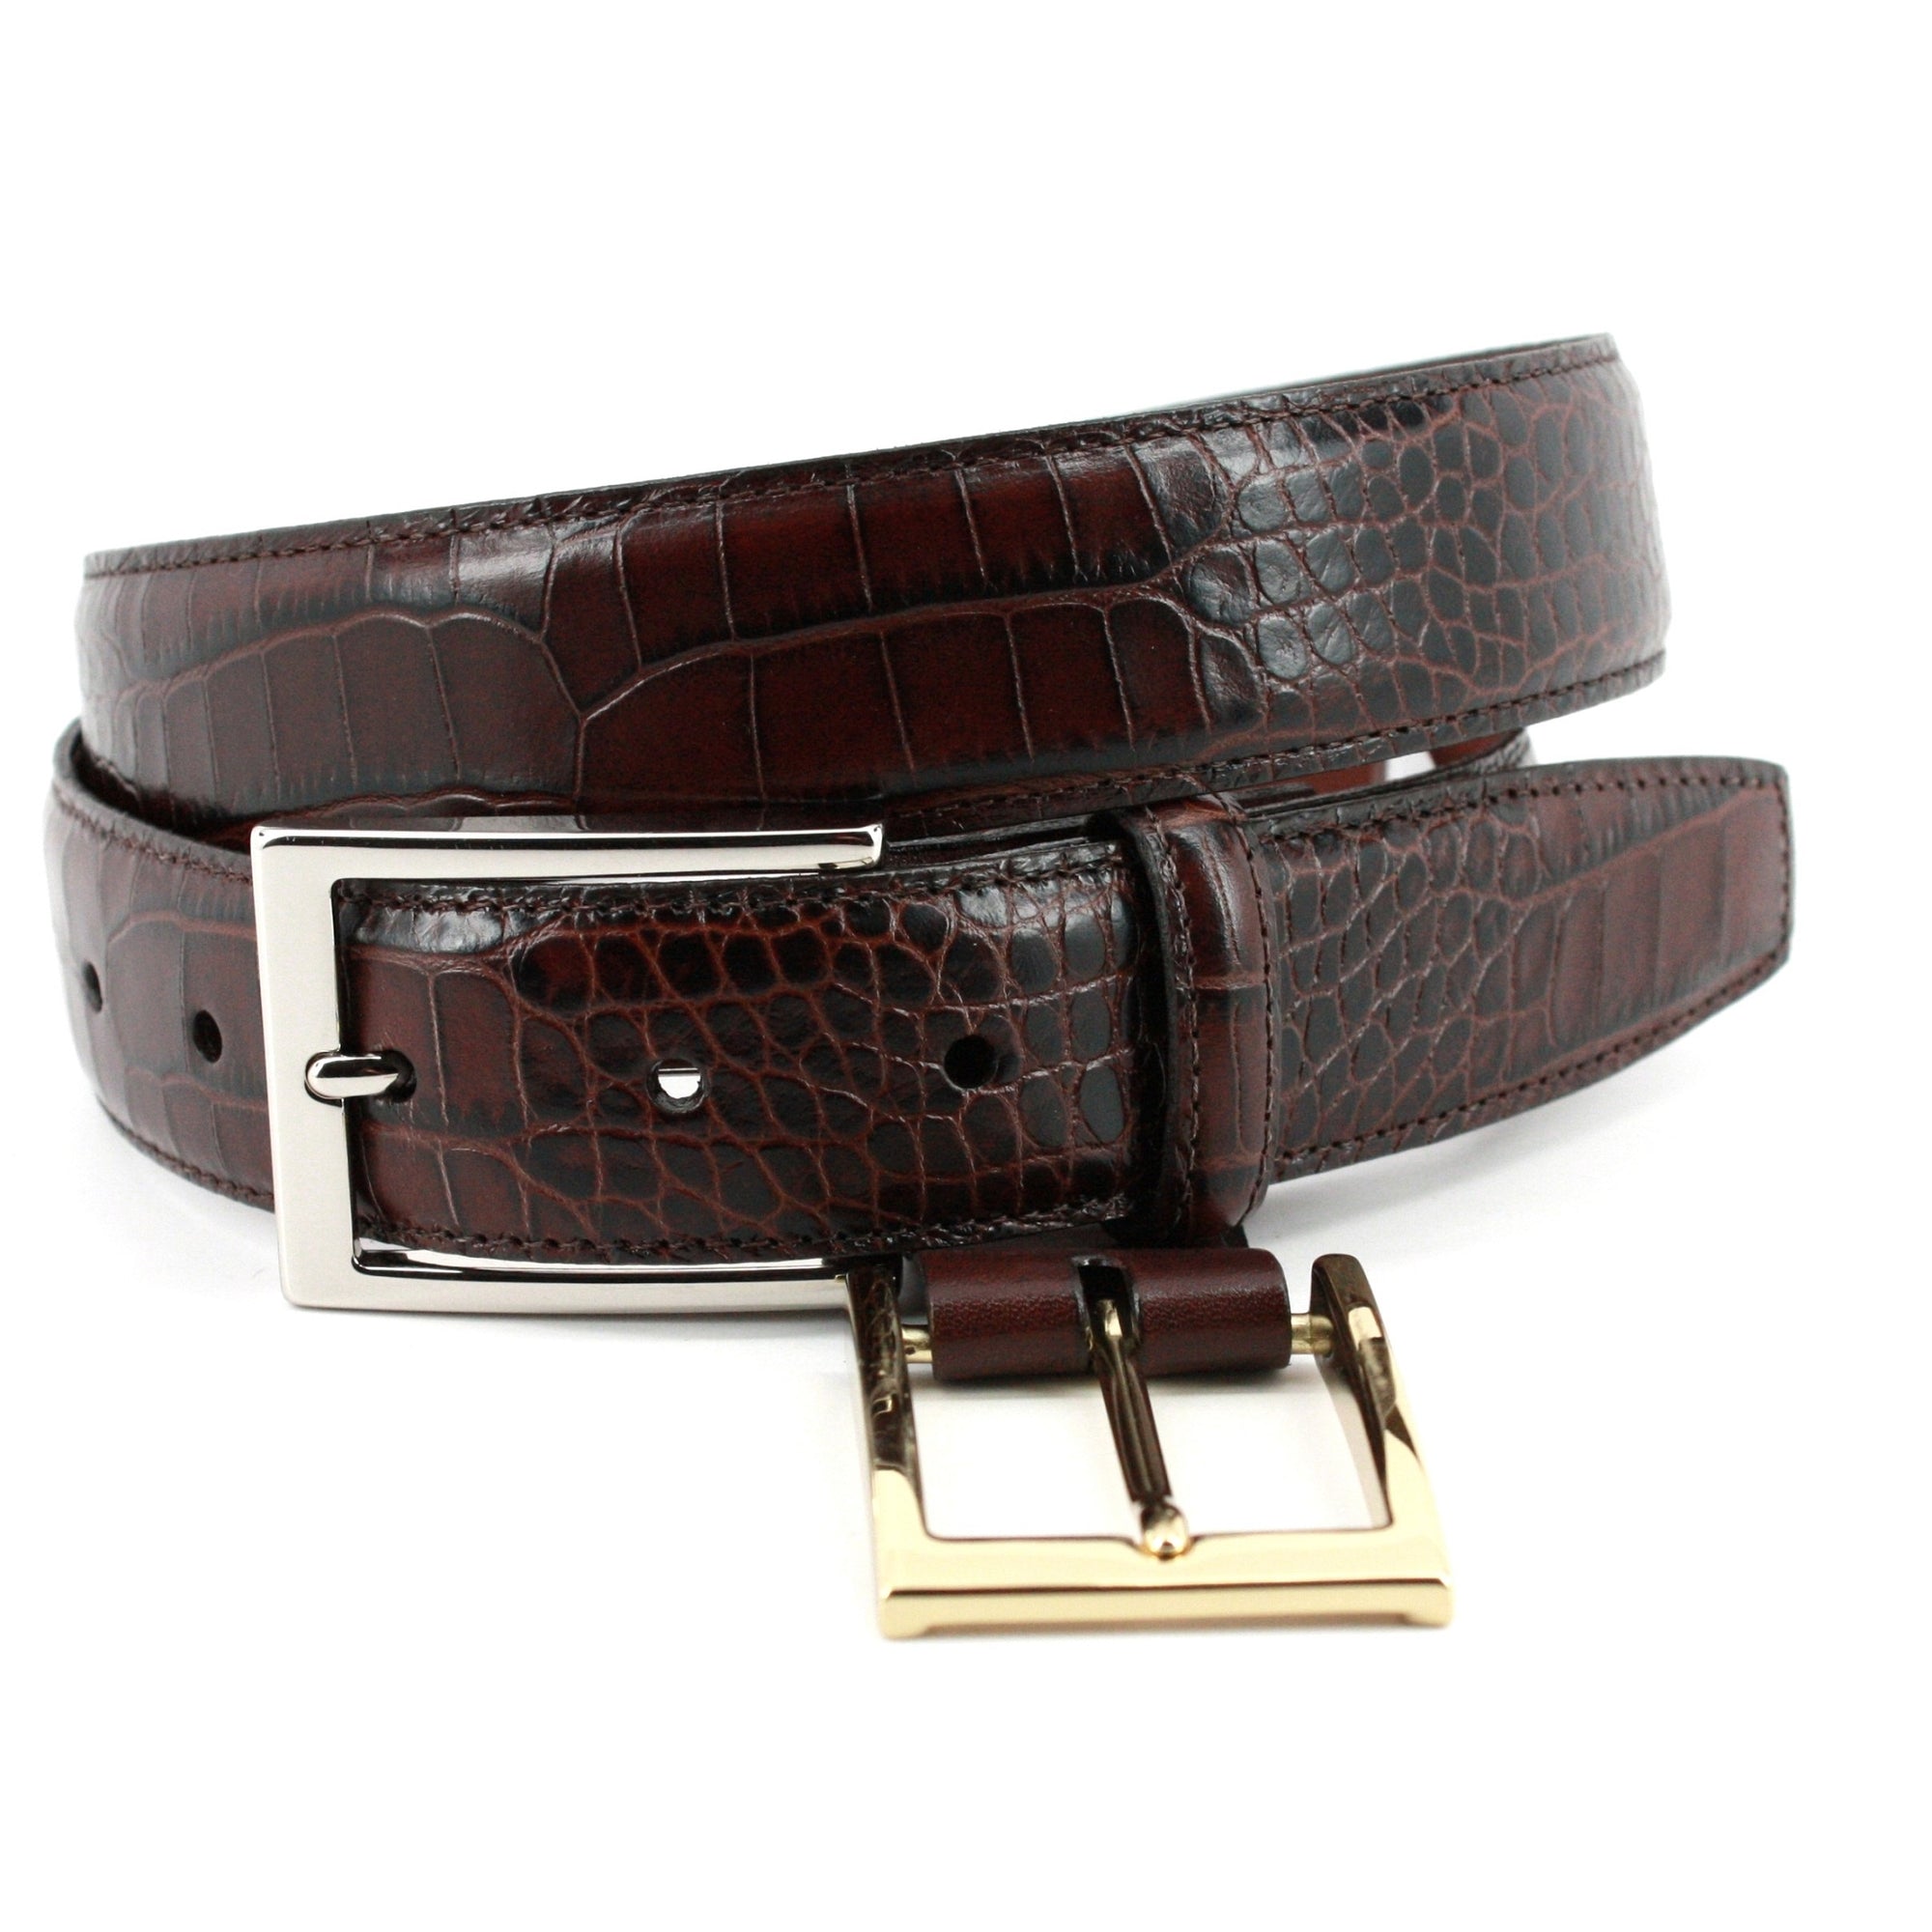 Alligator Grain Embossed Calfskin Belt with Interchangeable Buckles in Brown by Torino Leather